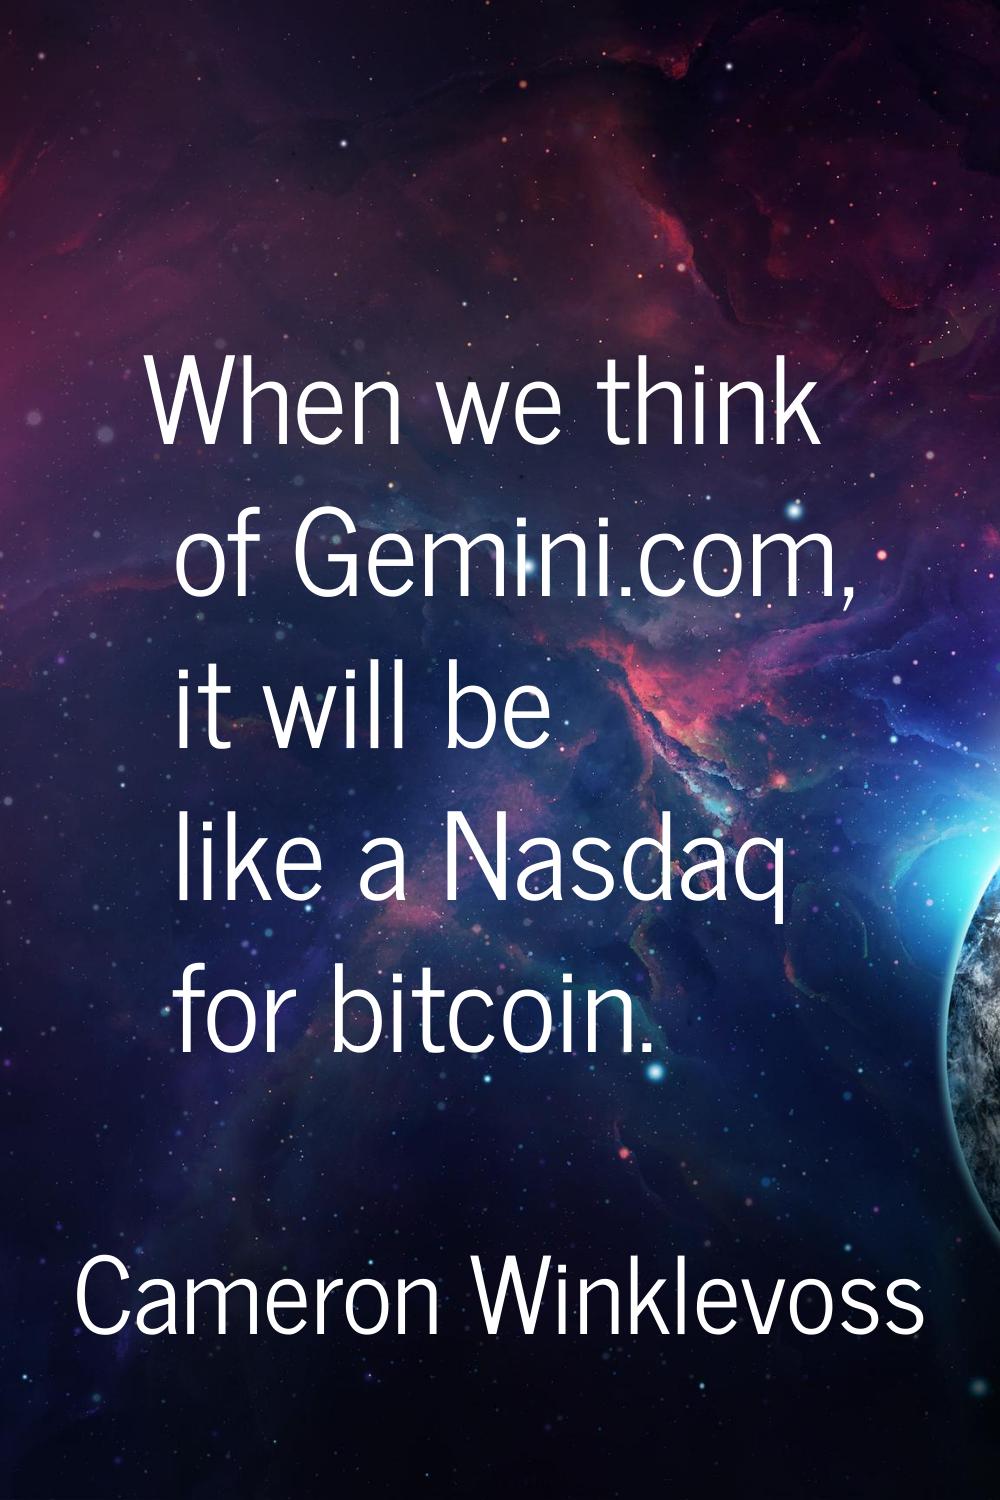 When we think of Gemini.com, it will be like a Nasdaq for bitcoin.